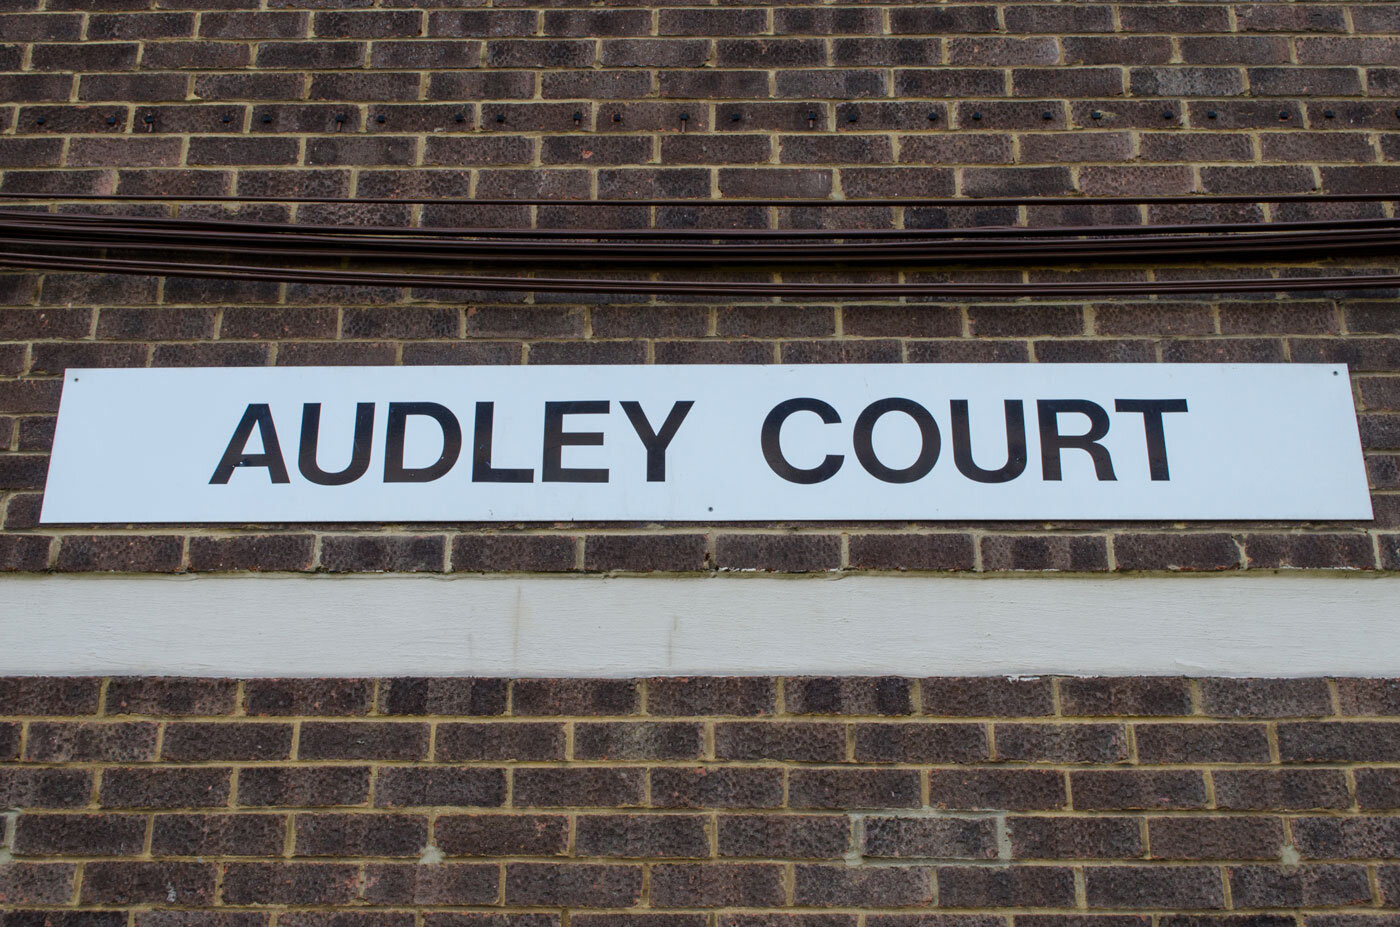 Audley-Court--(19-of-19).jpg